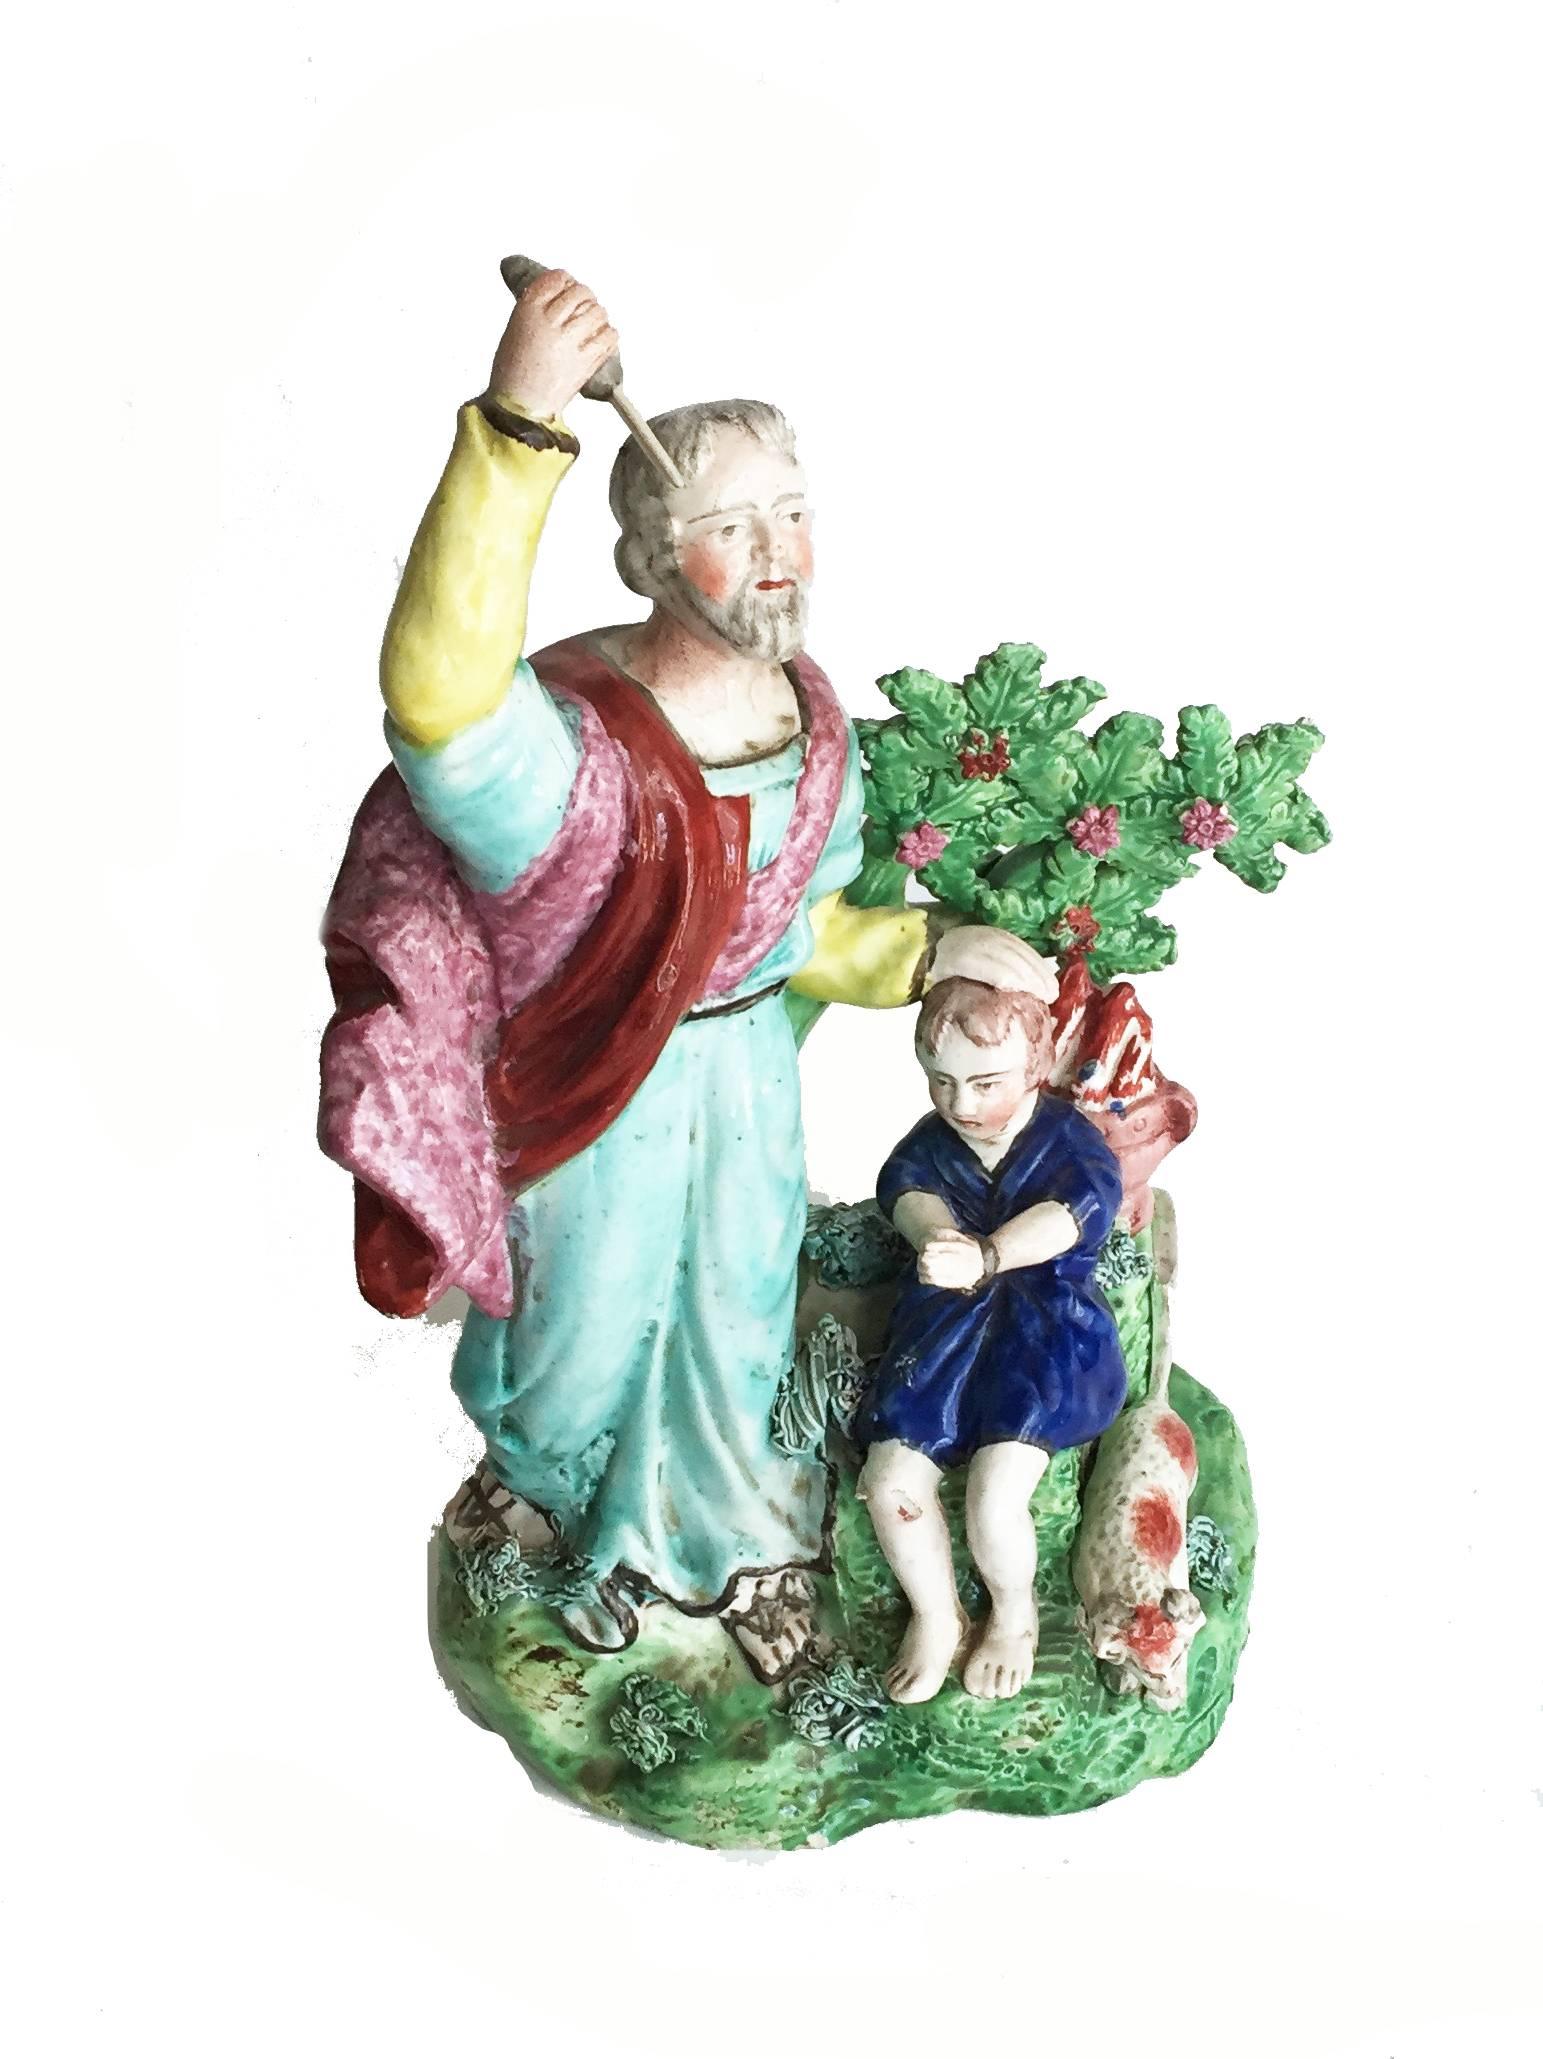 English Staffordshire pottery rare figure of Abraham offering to slay Isaac. The somber figure of Abraham wielding a knife on the left side of the ovular, low-mounded green base, with the figure of Isaac seated under a tree issuing bocage to his